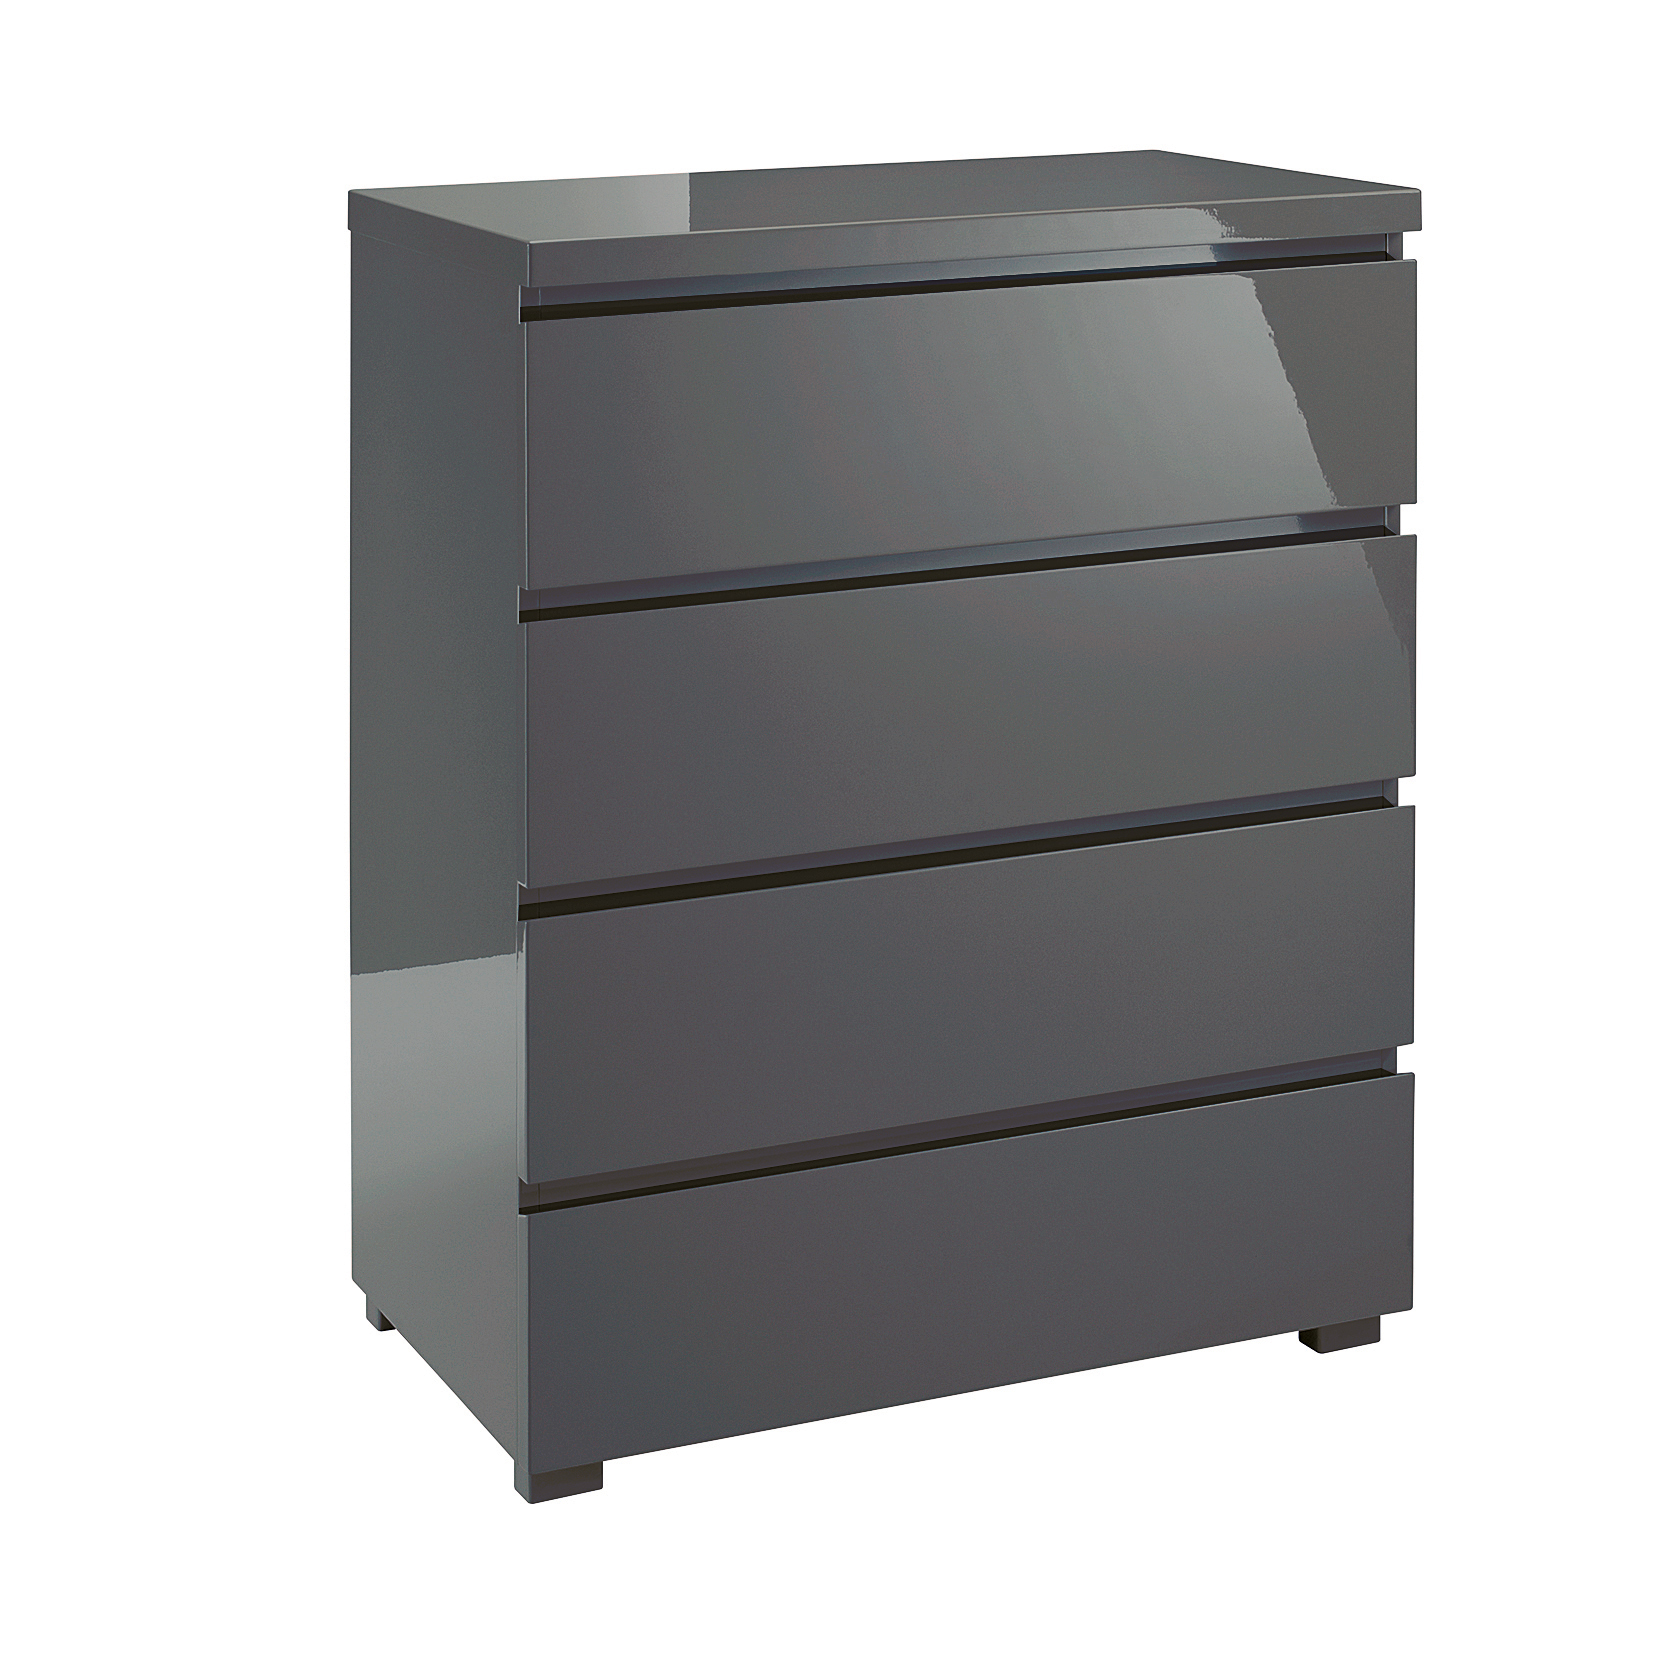 Manny 4 Drawer Chest Charcoal